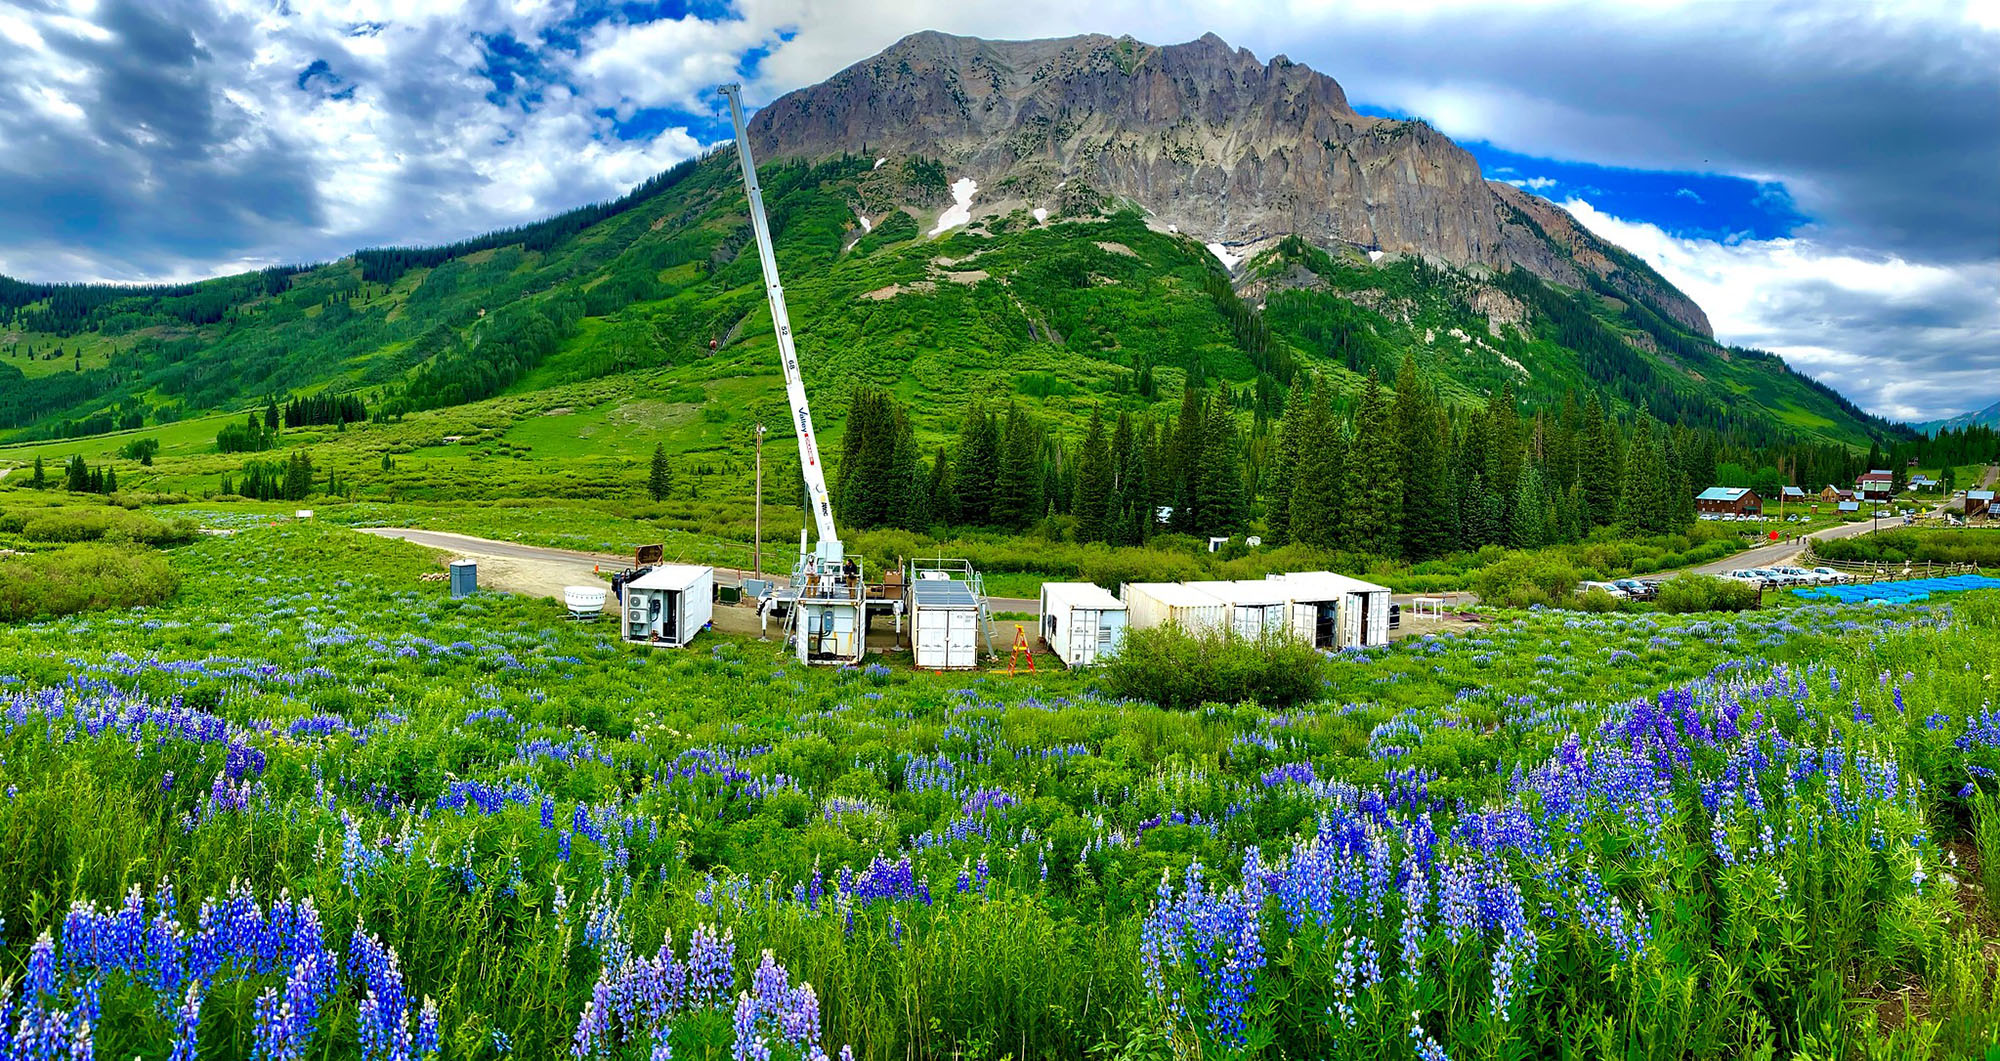 Blue wildflowers in front of a field of scientific instruments and green mountains.